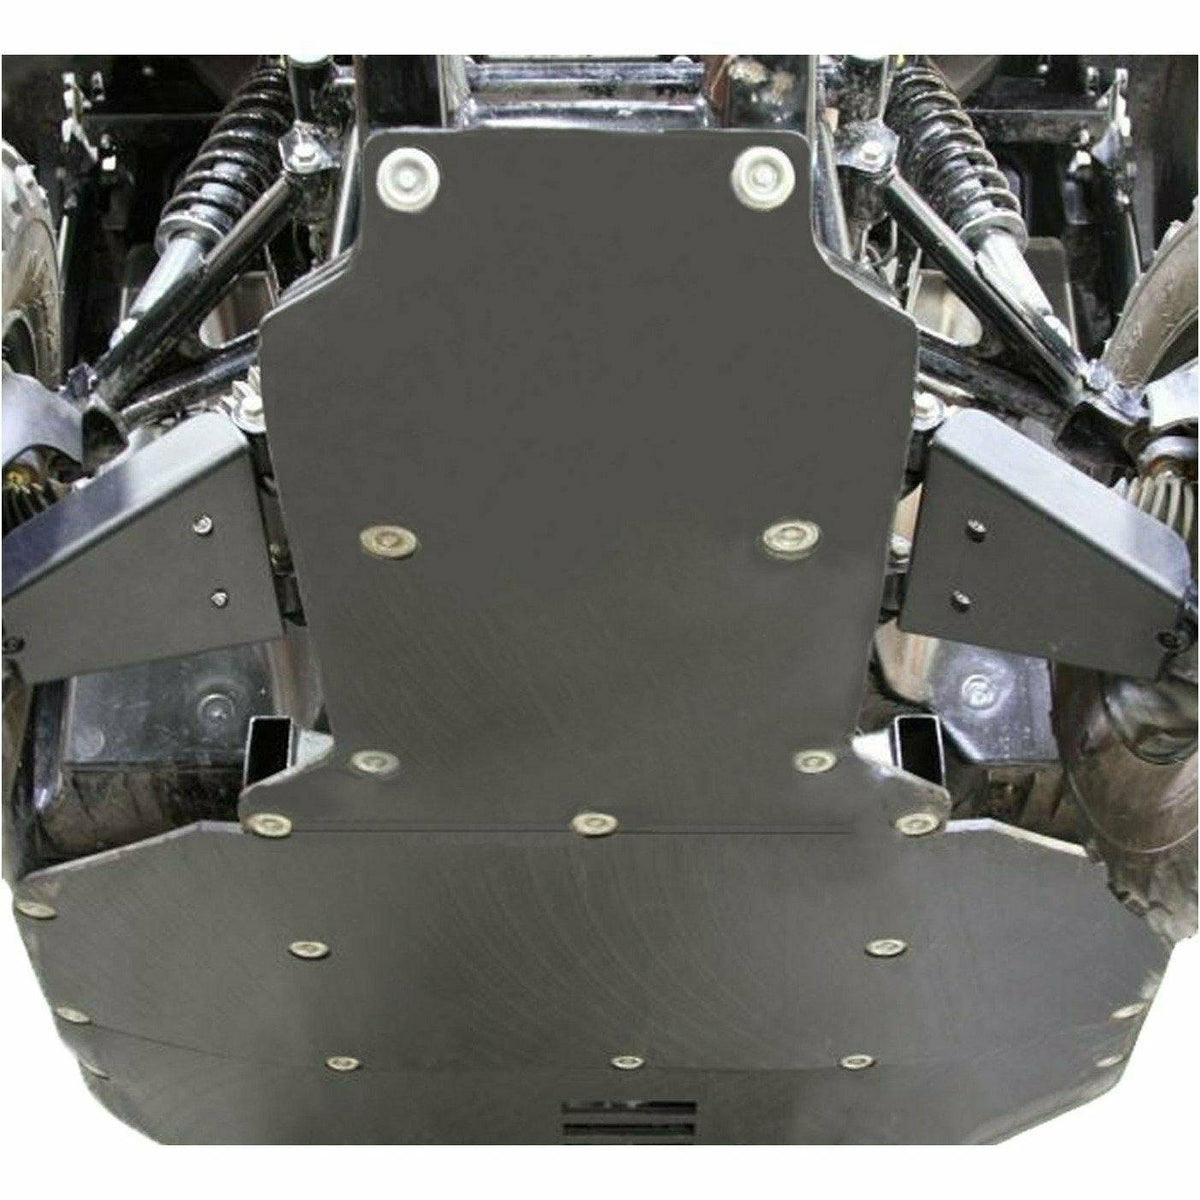 SSS Off-Road UHMW Arm Guards for Honda Pioneer 500